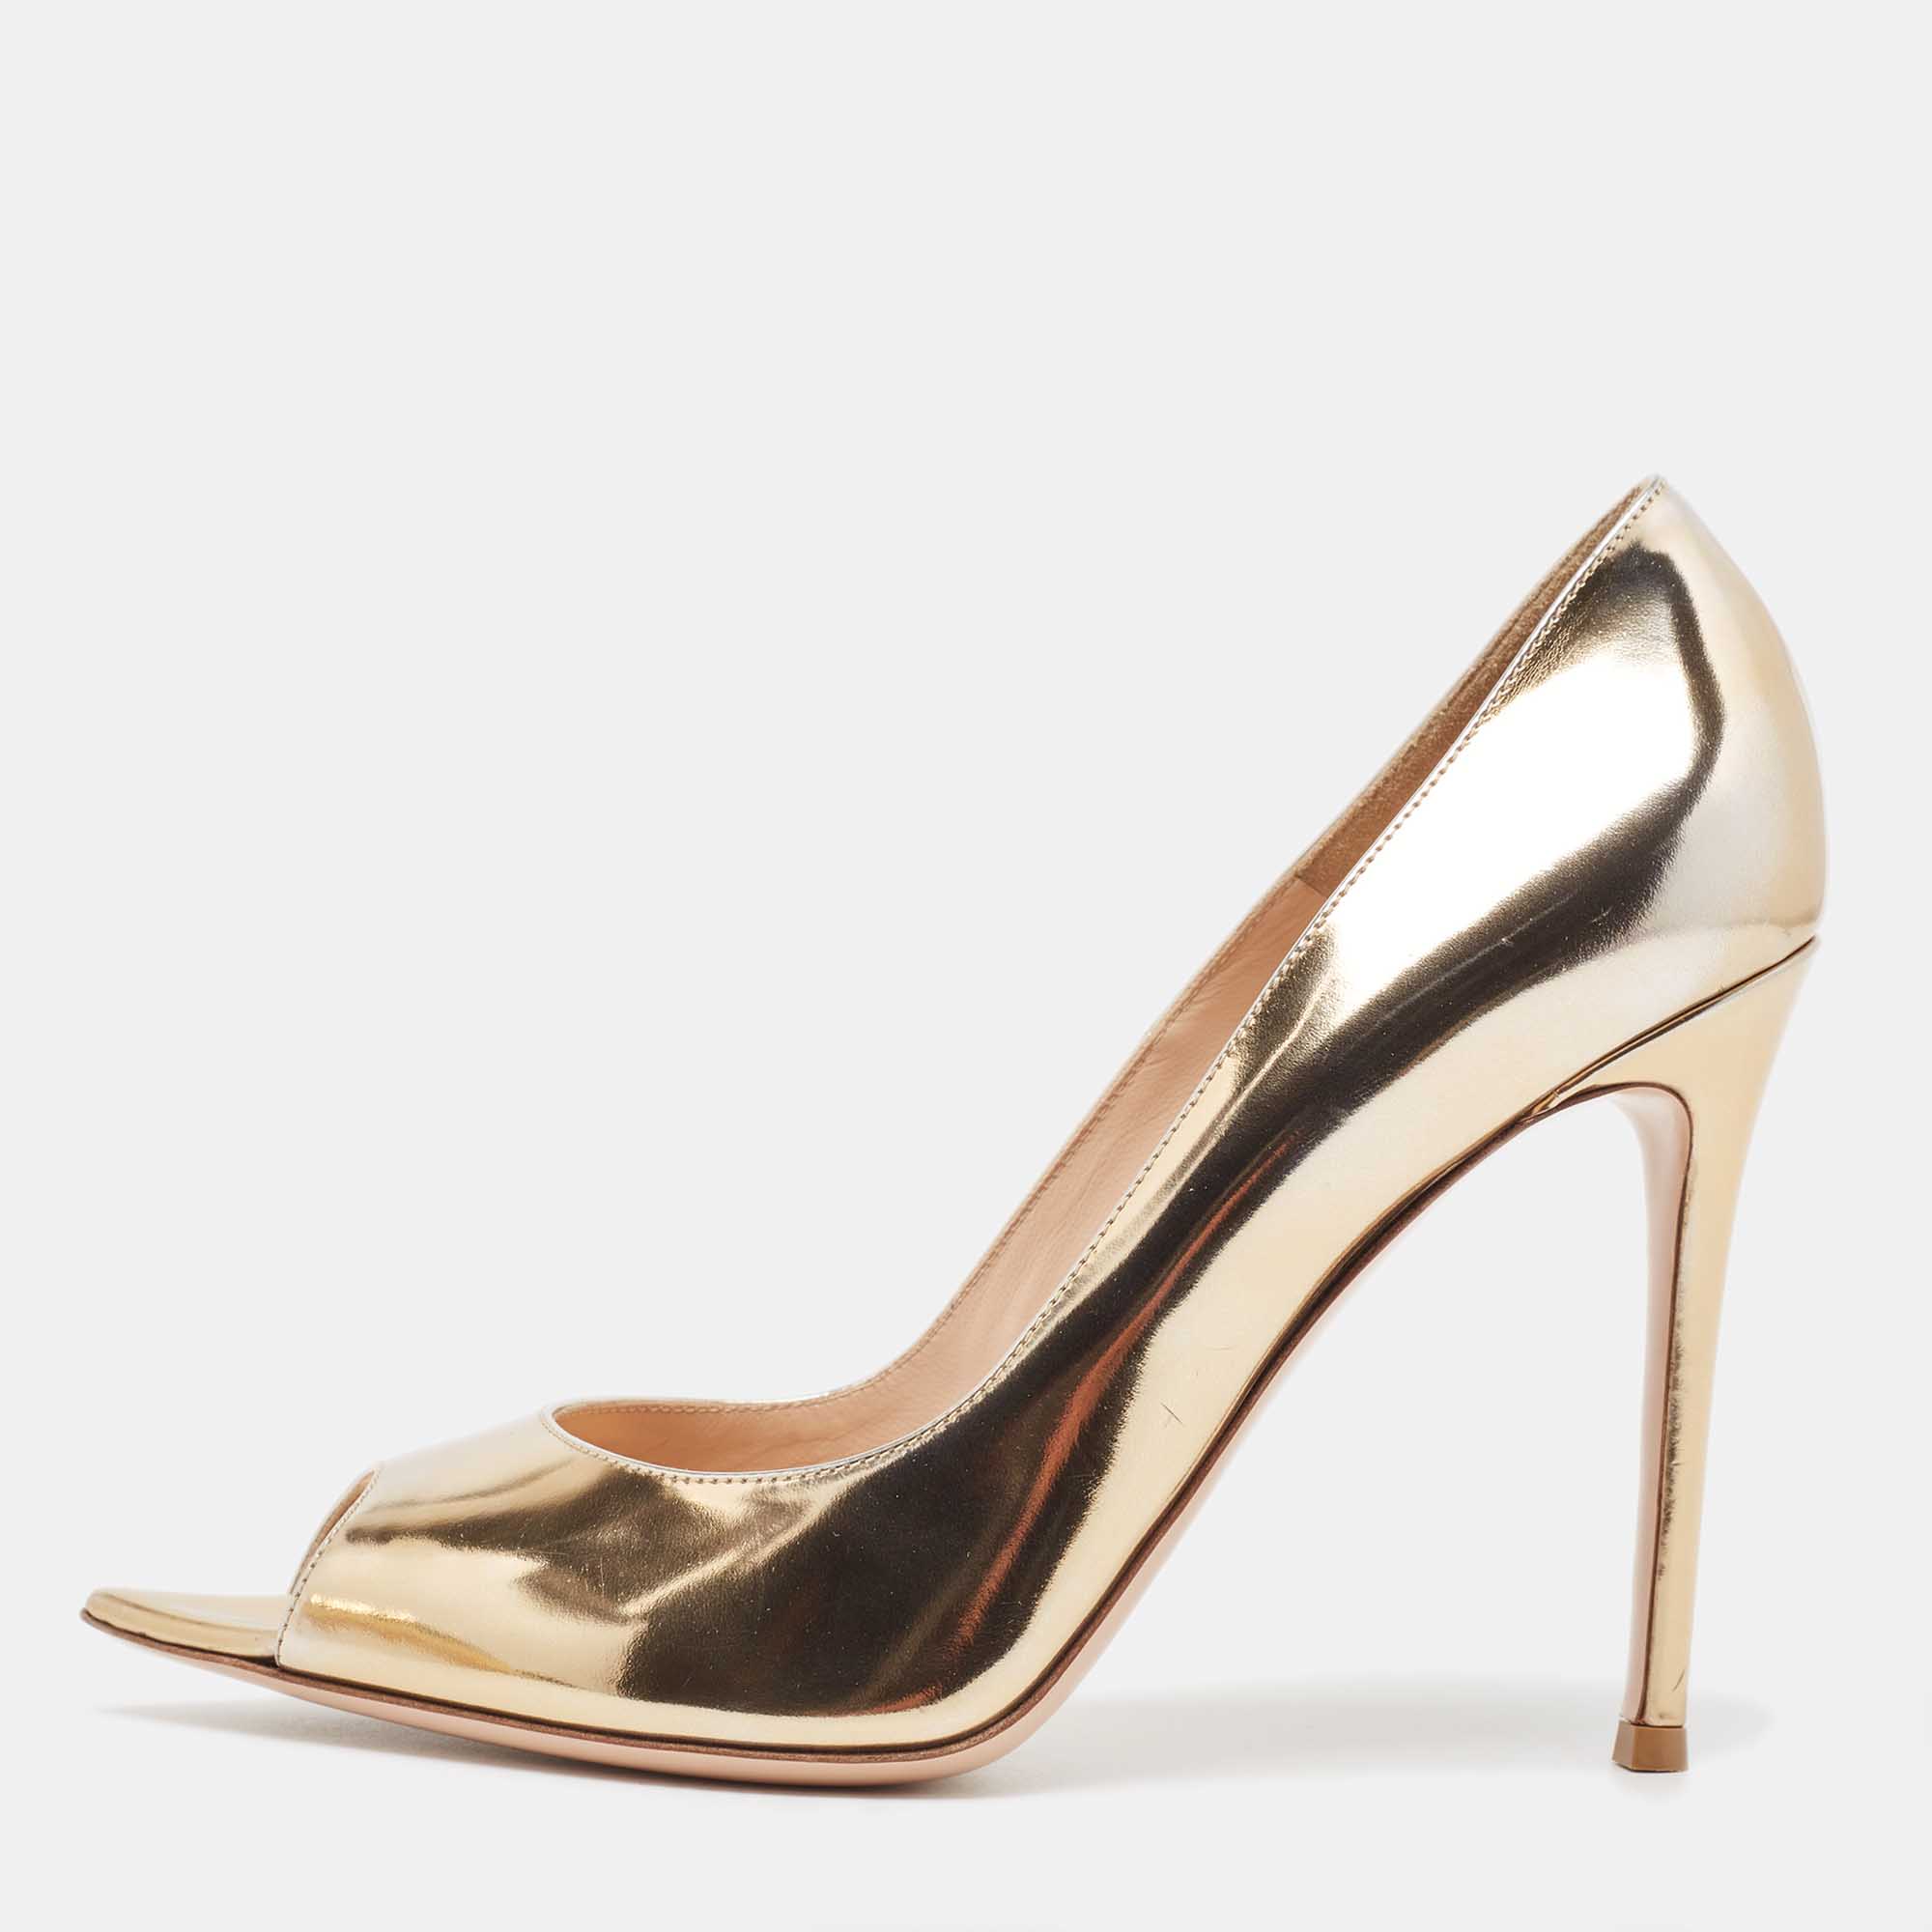 Gianvito Rossi Gold Leather Open Toe Pumps Size 41